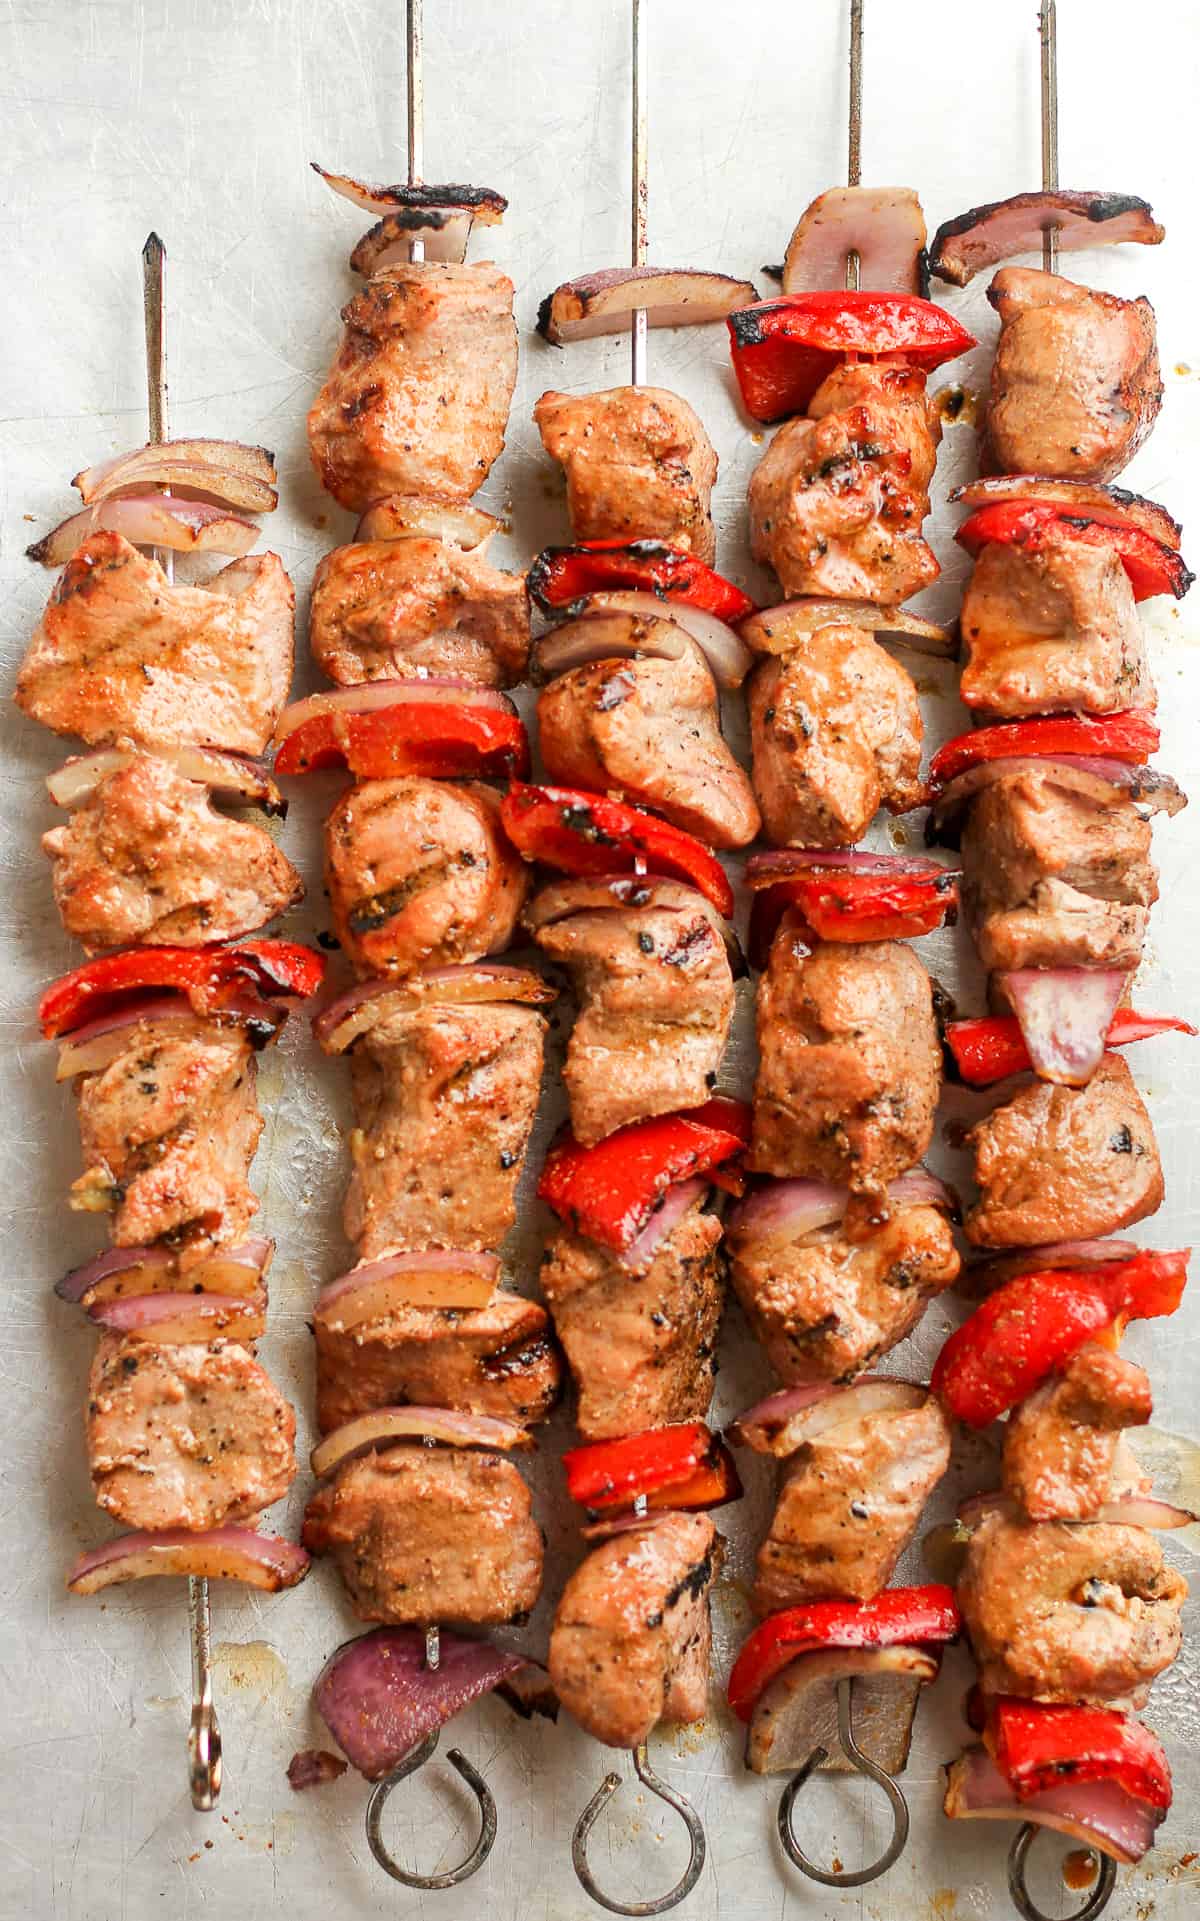 The grilled pork kabobs with peppers and onions.